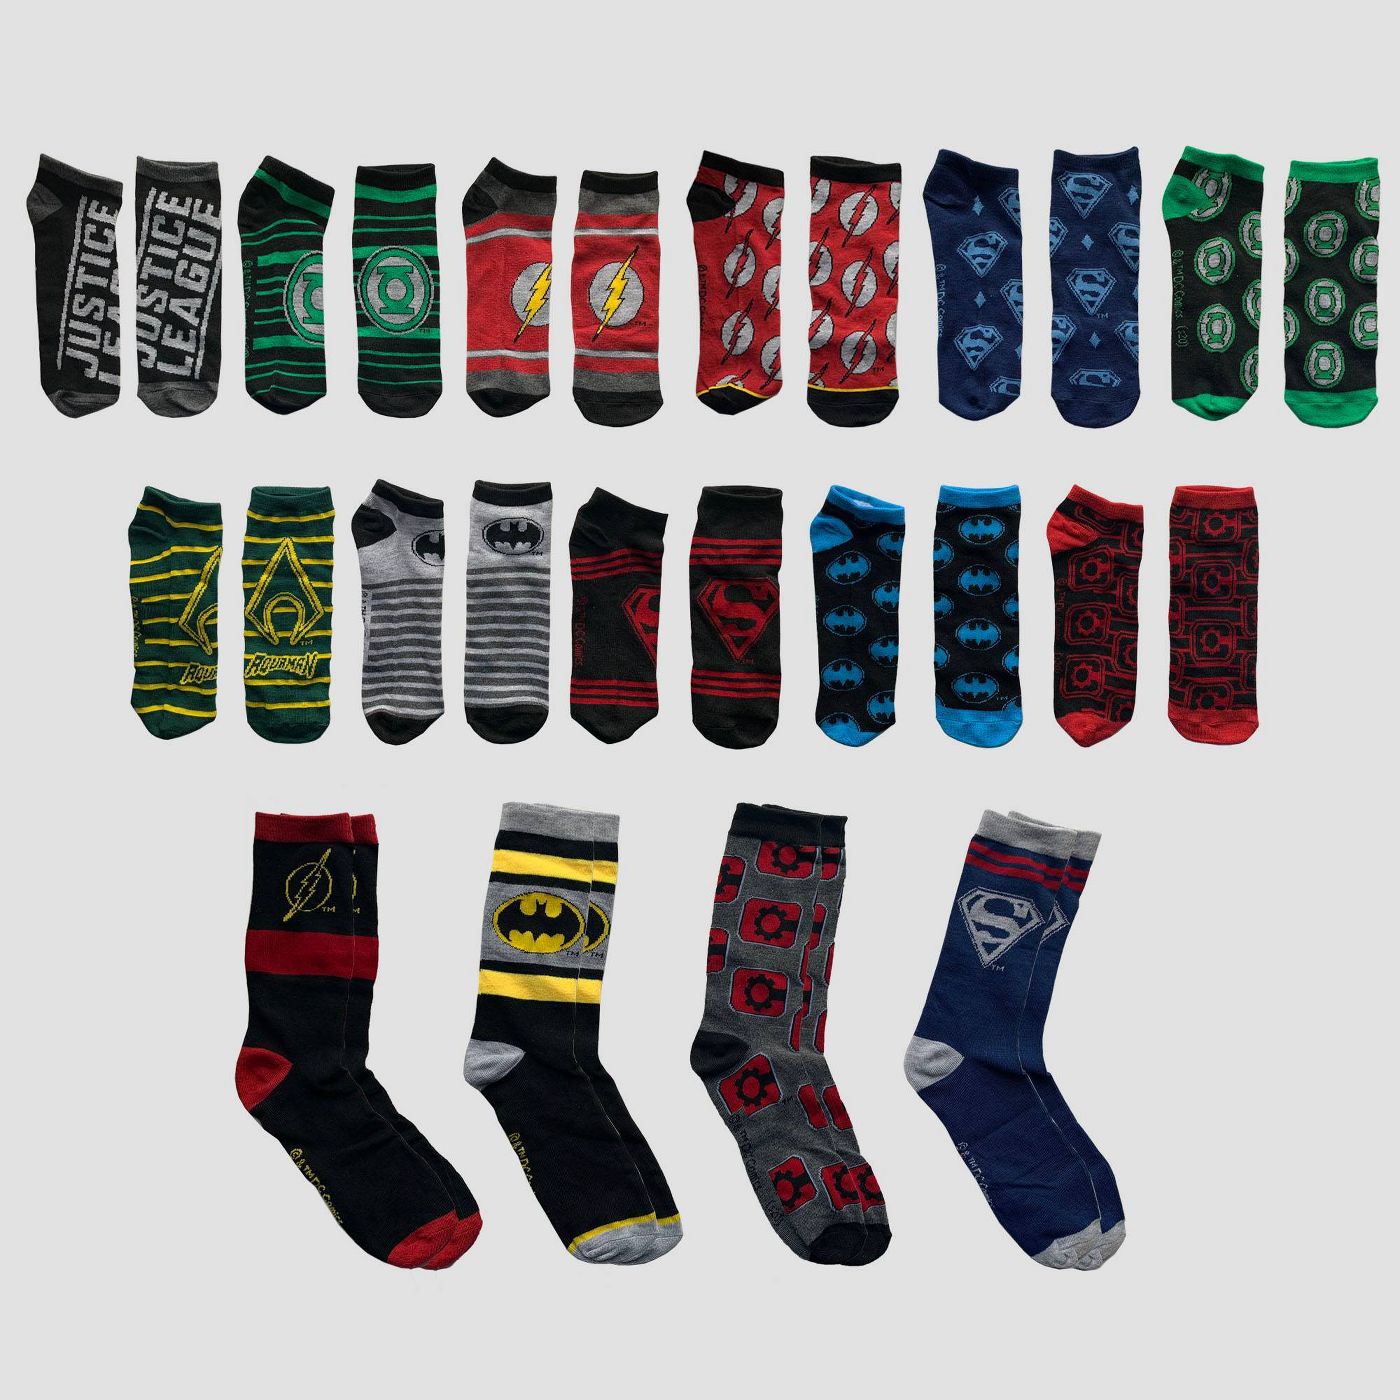 Men's DC Comics 15 Days of Socks Advent Calendar - Assorted Colors One Size - image 1 of 4